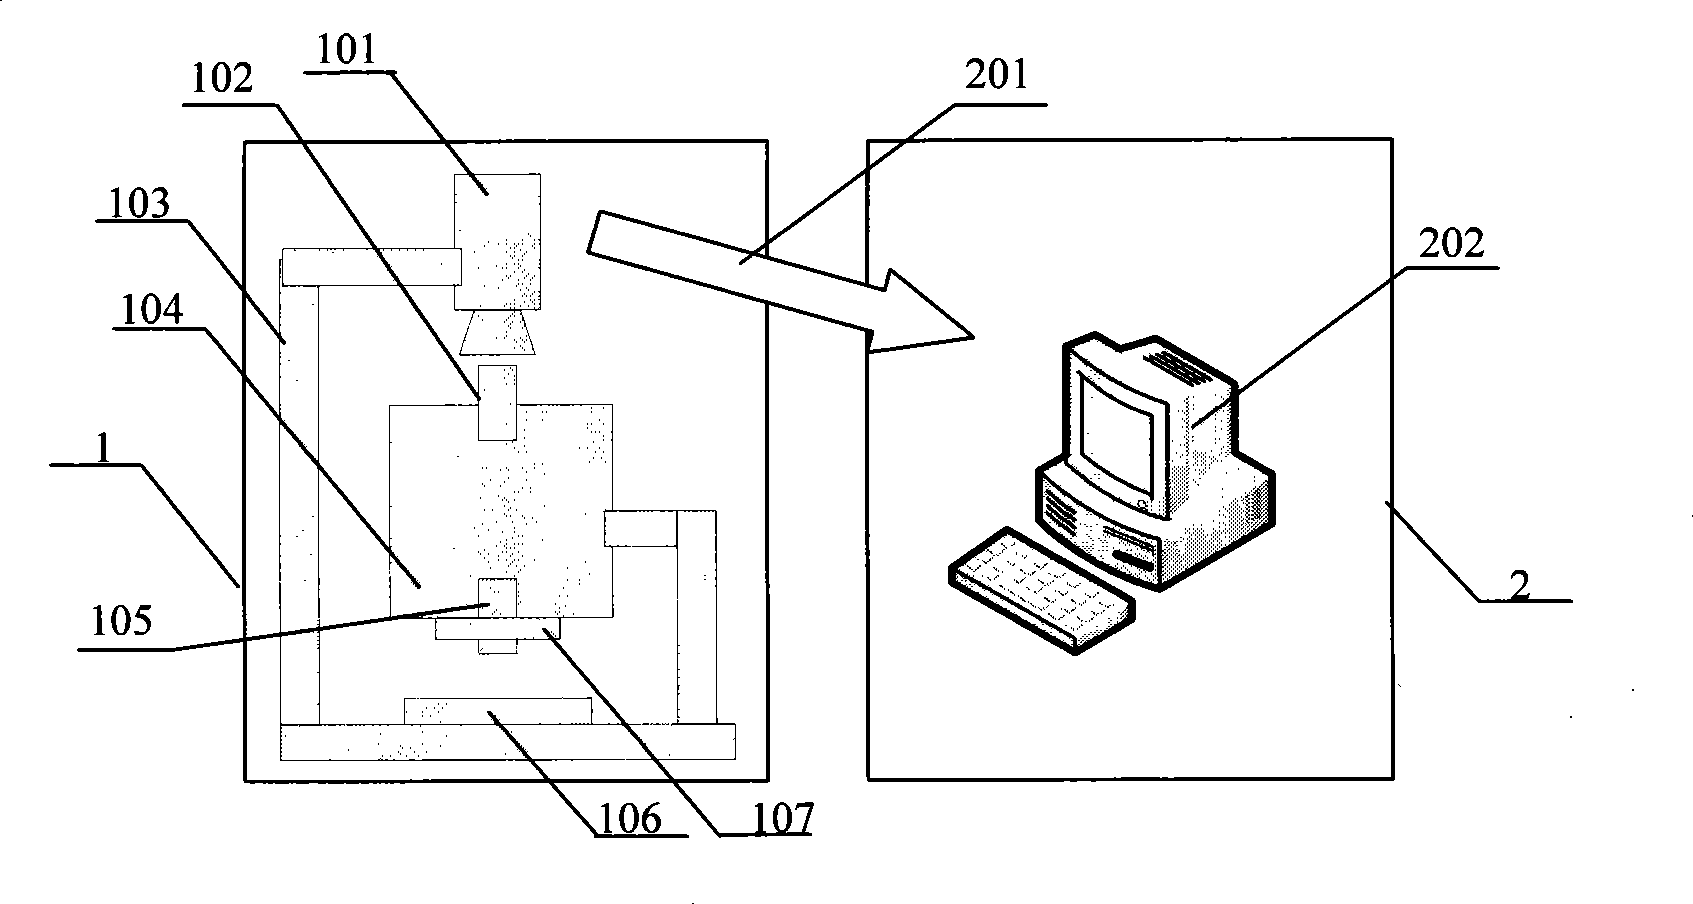 Soldered ball surface defect detection device and method based on machine vision